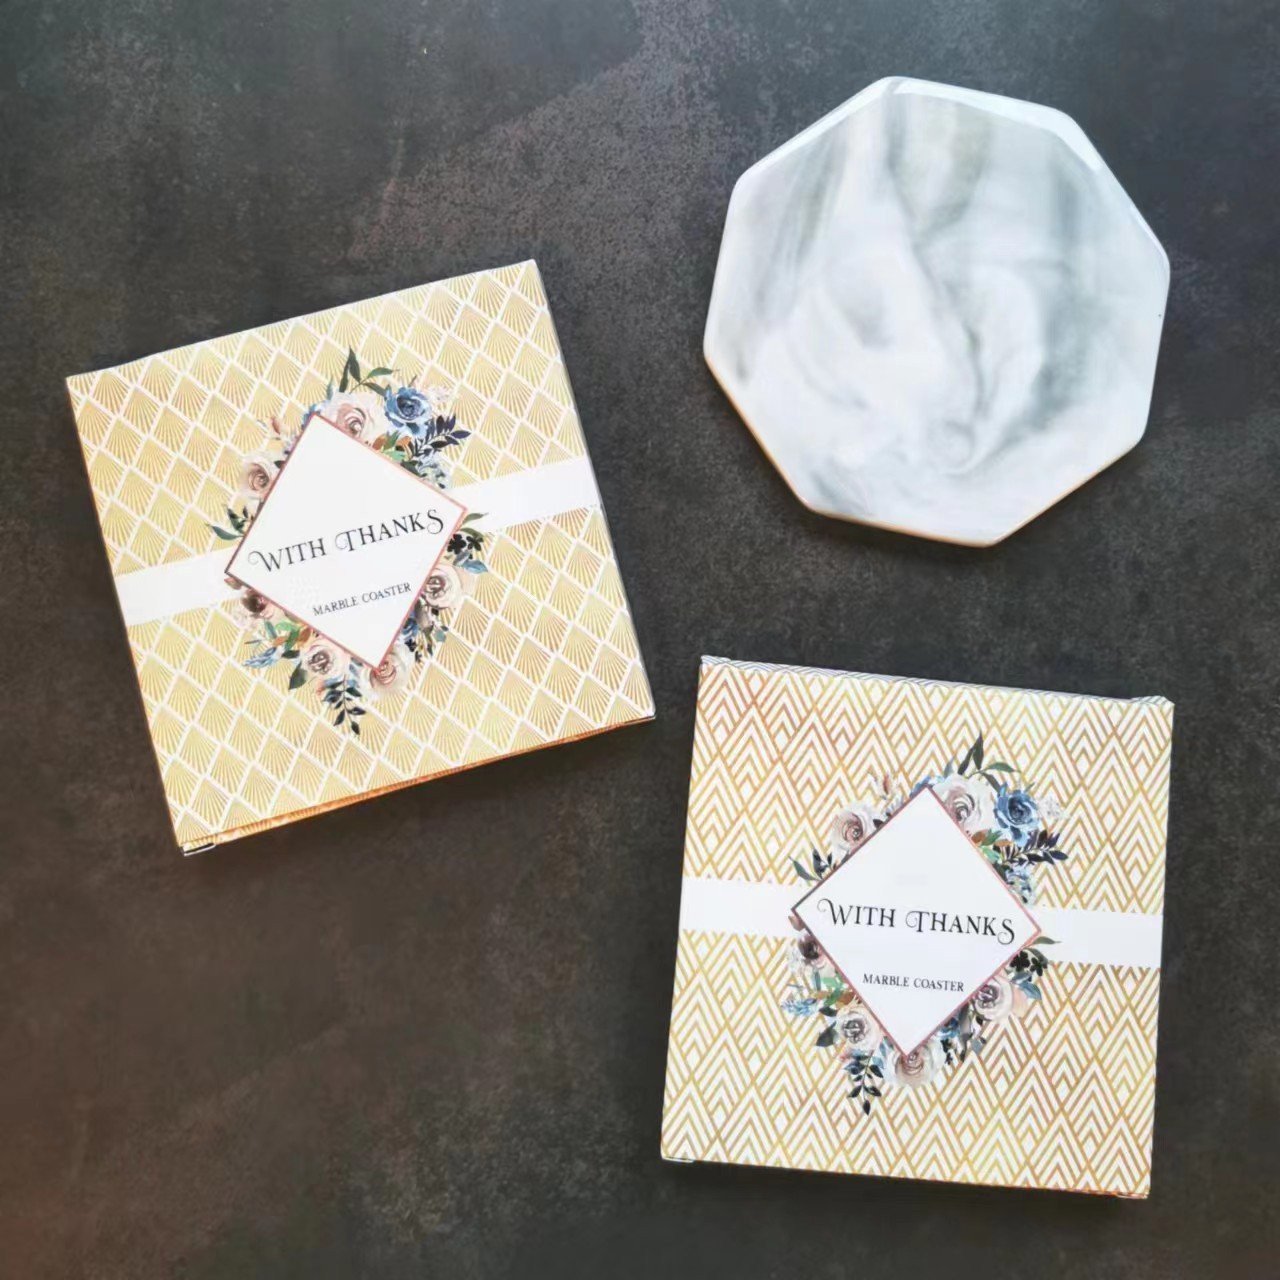 Marble & Gold Coaster Favors